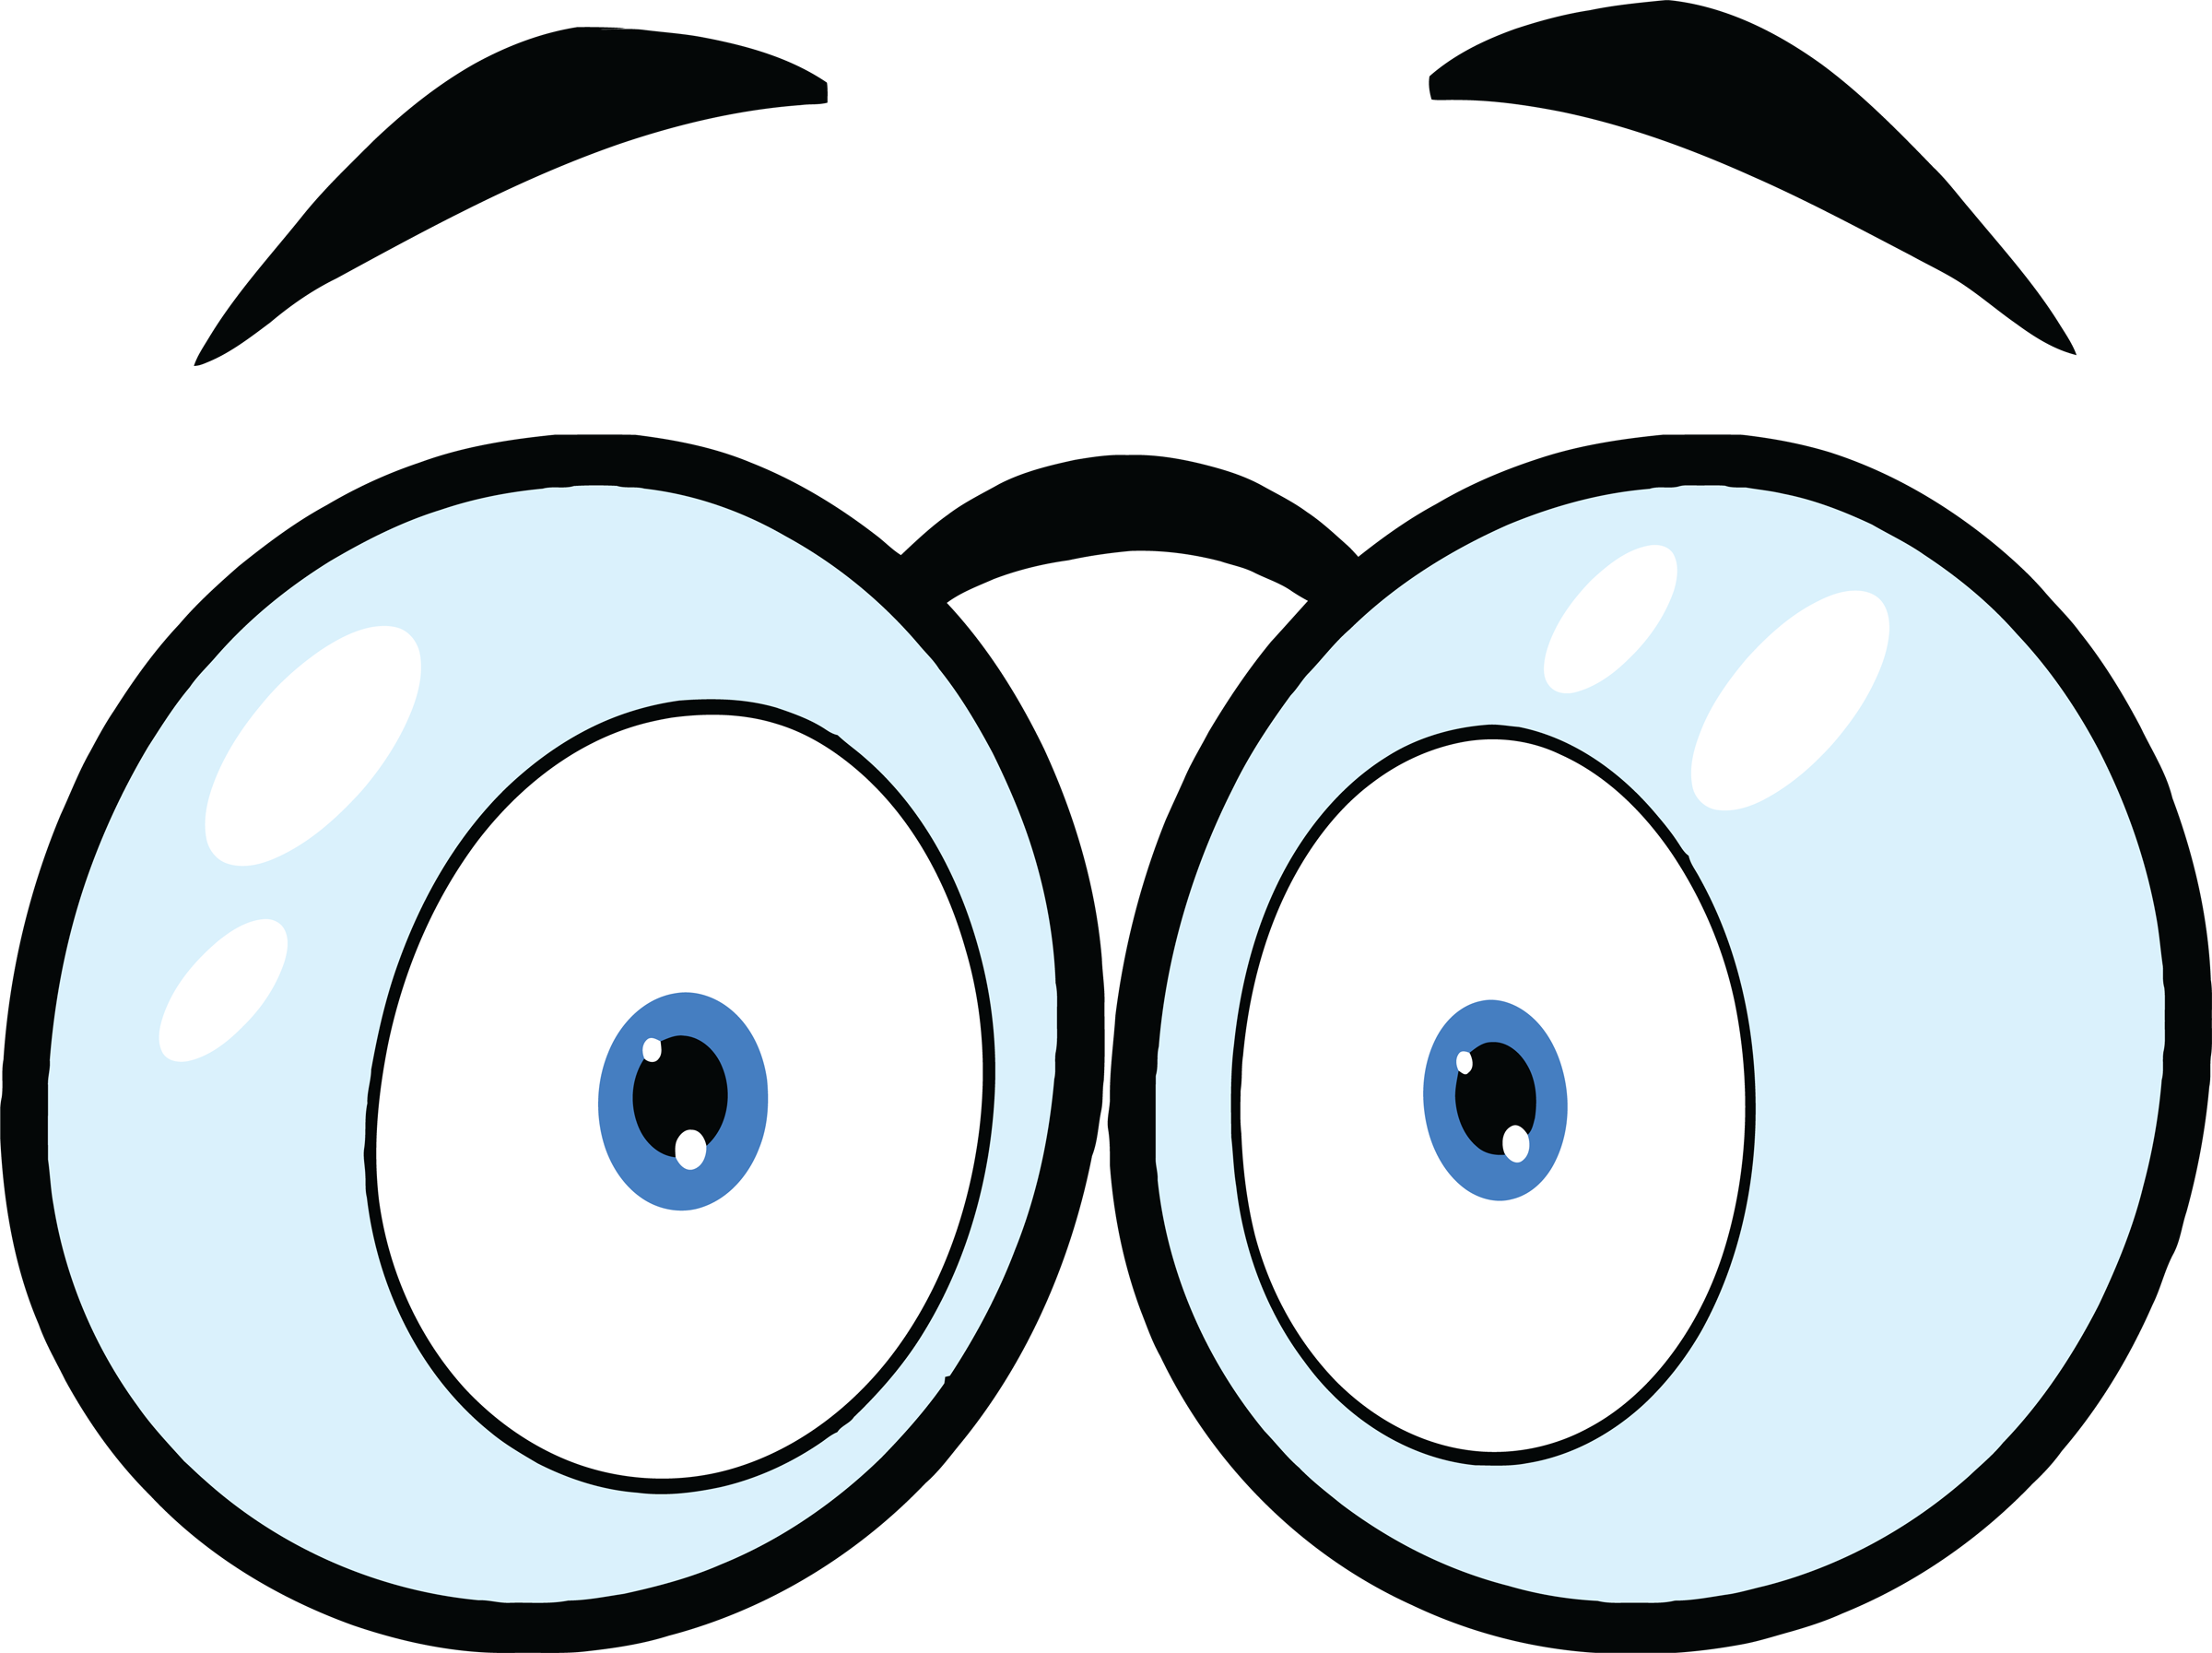 Scared look eyes clipart 